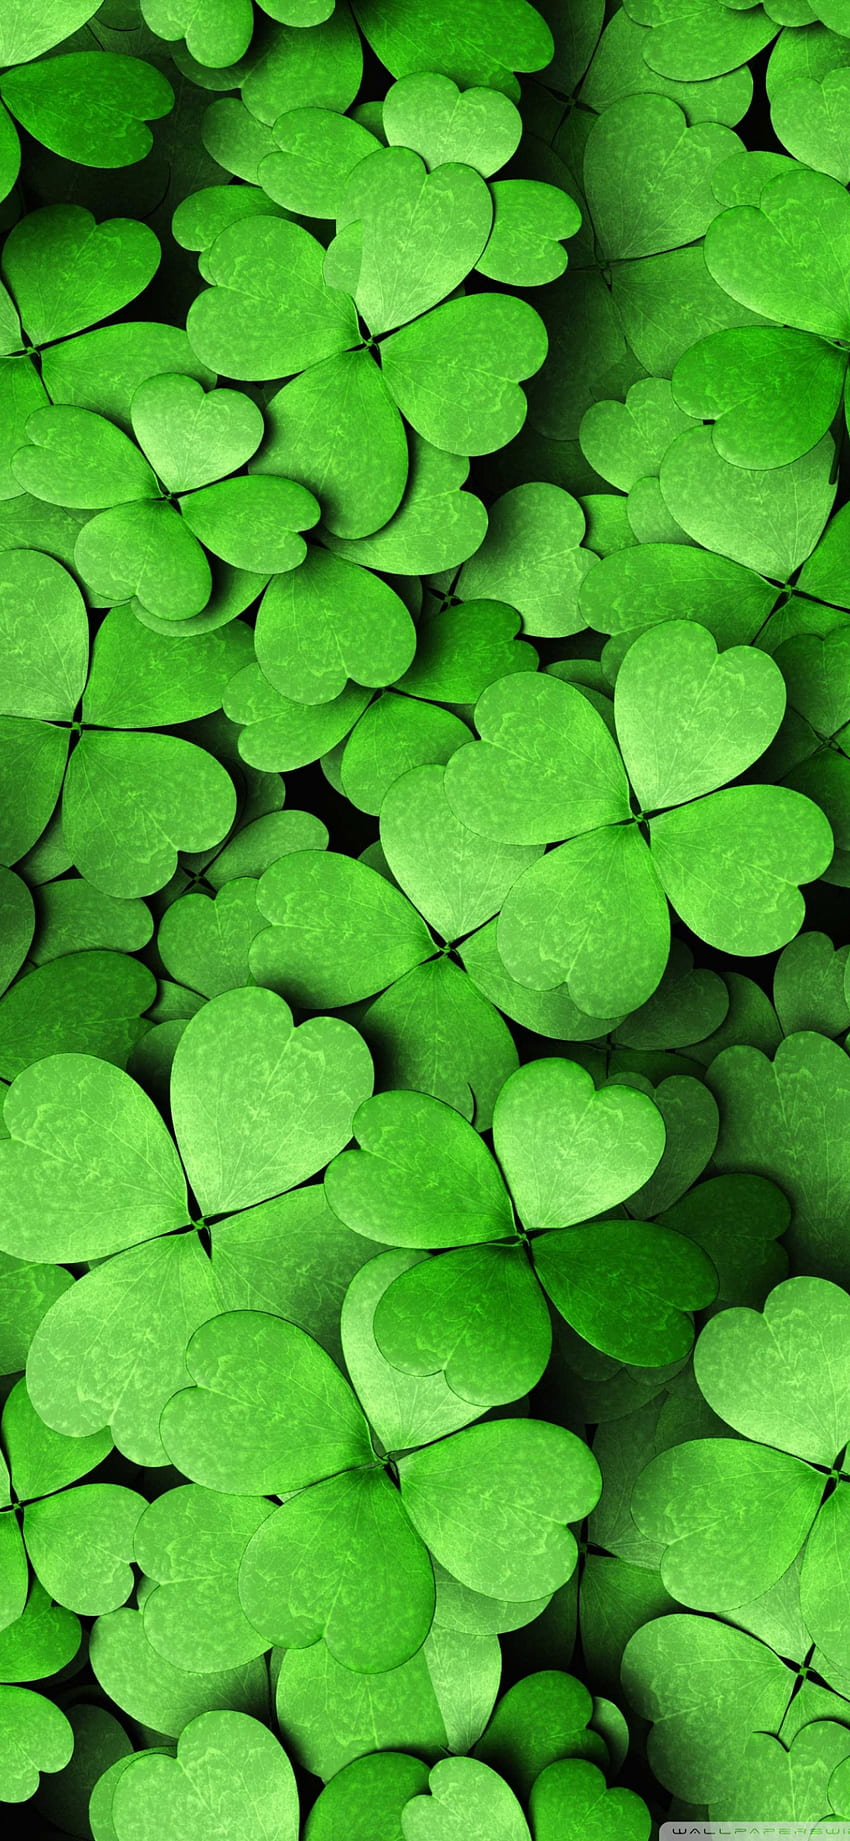 47 Android 4 Leaves Clover Wallpapers  WallpaperSafari